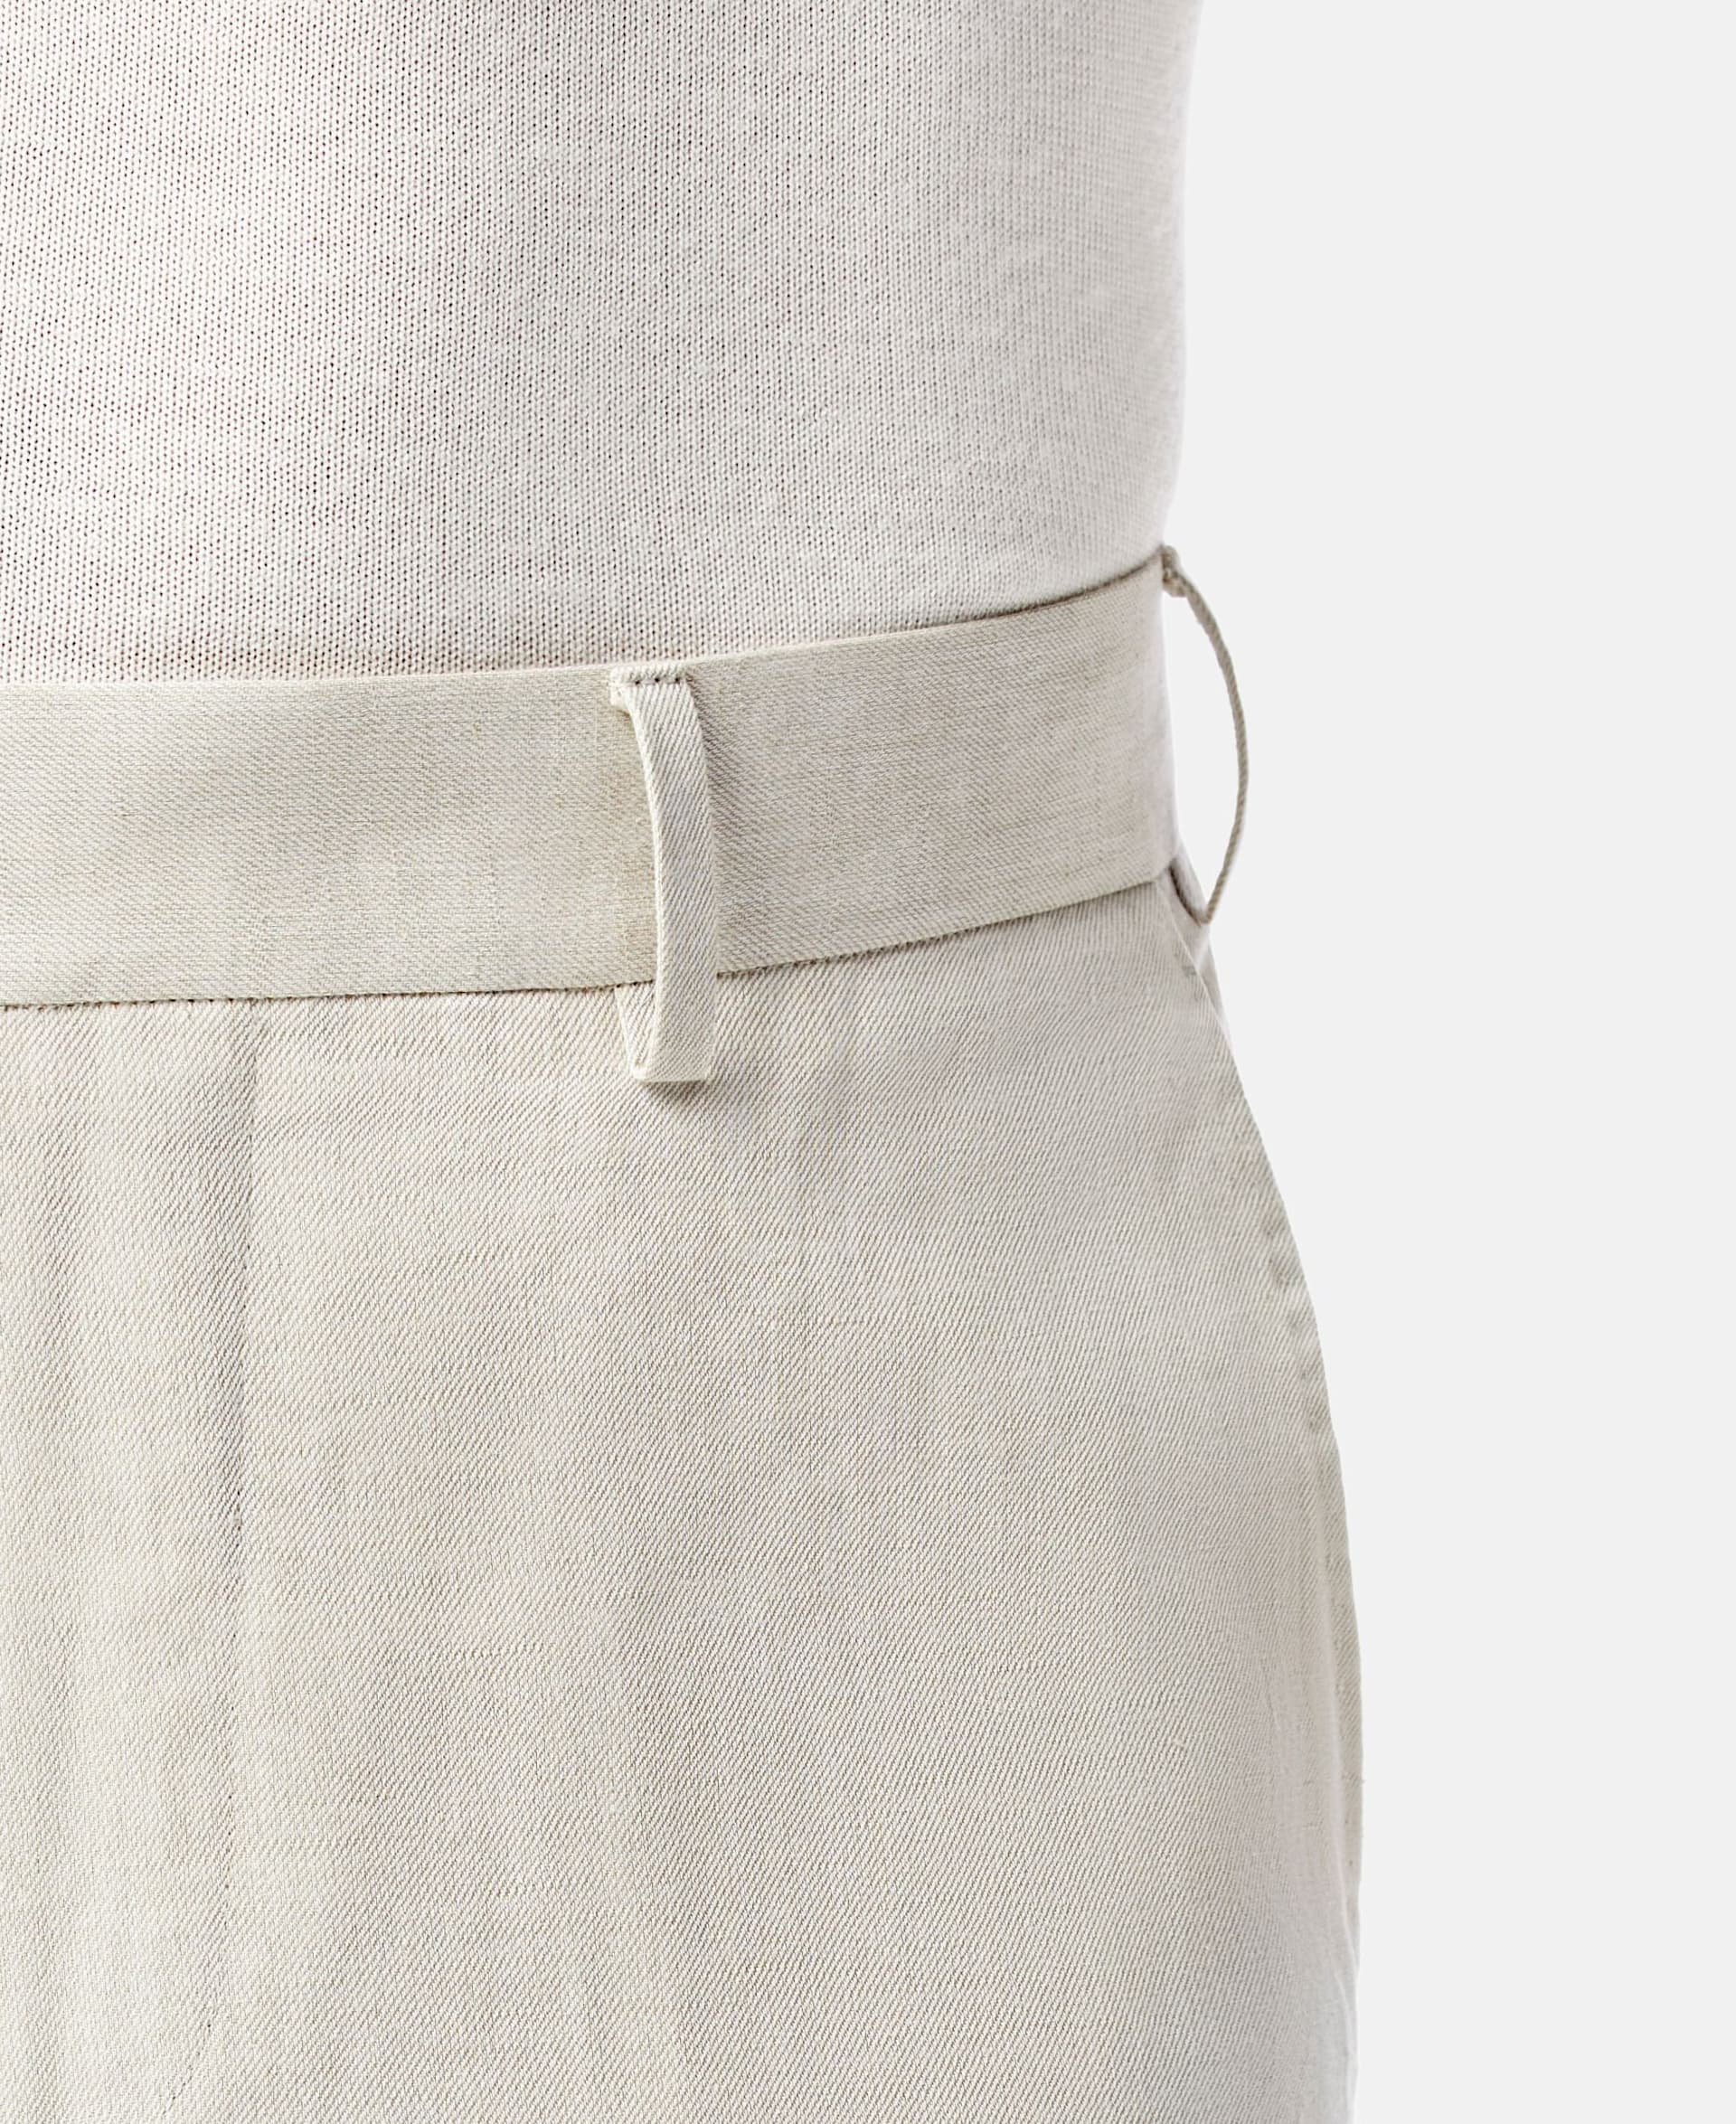 One of the most popular and versatile ways of fastening your waistband, a belt loop.